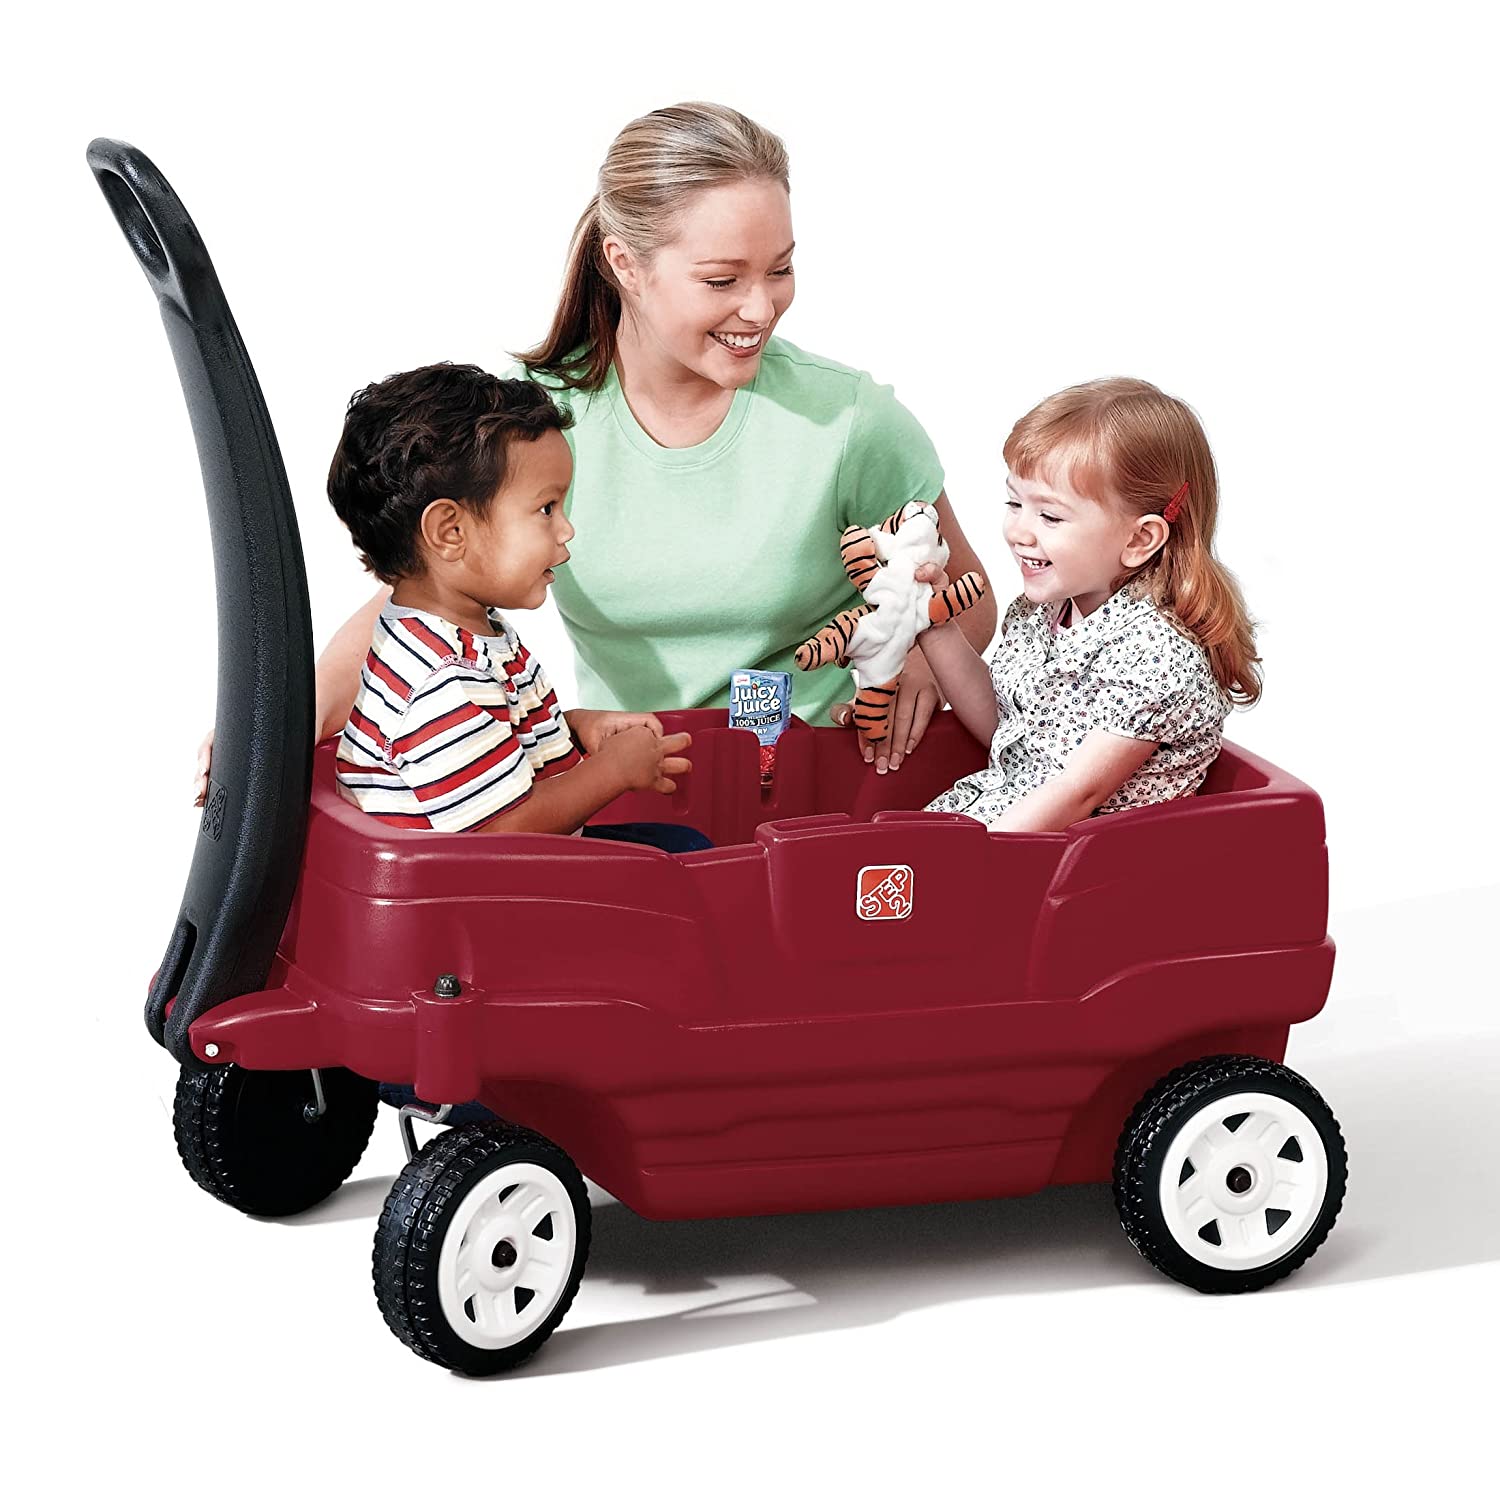 Top 10 Best Wagons for Kids Reviews in 2023 2